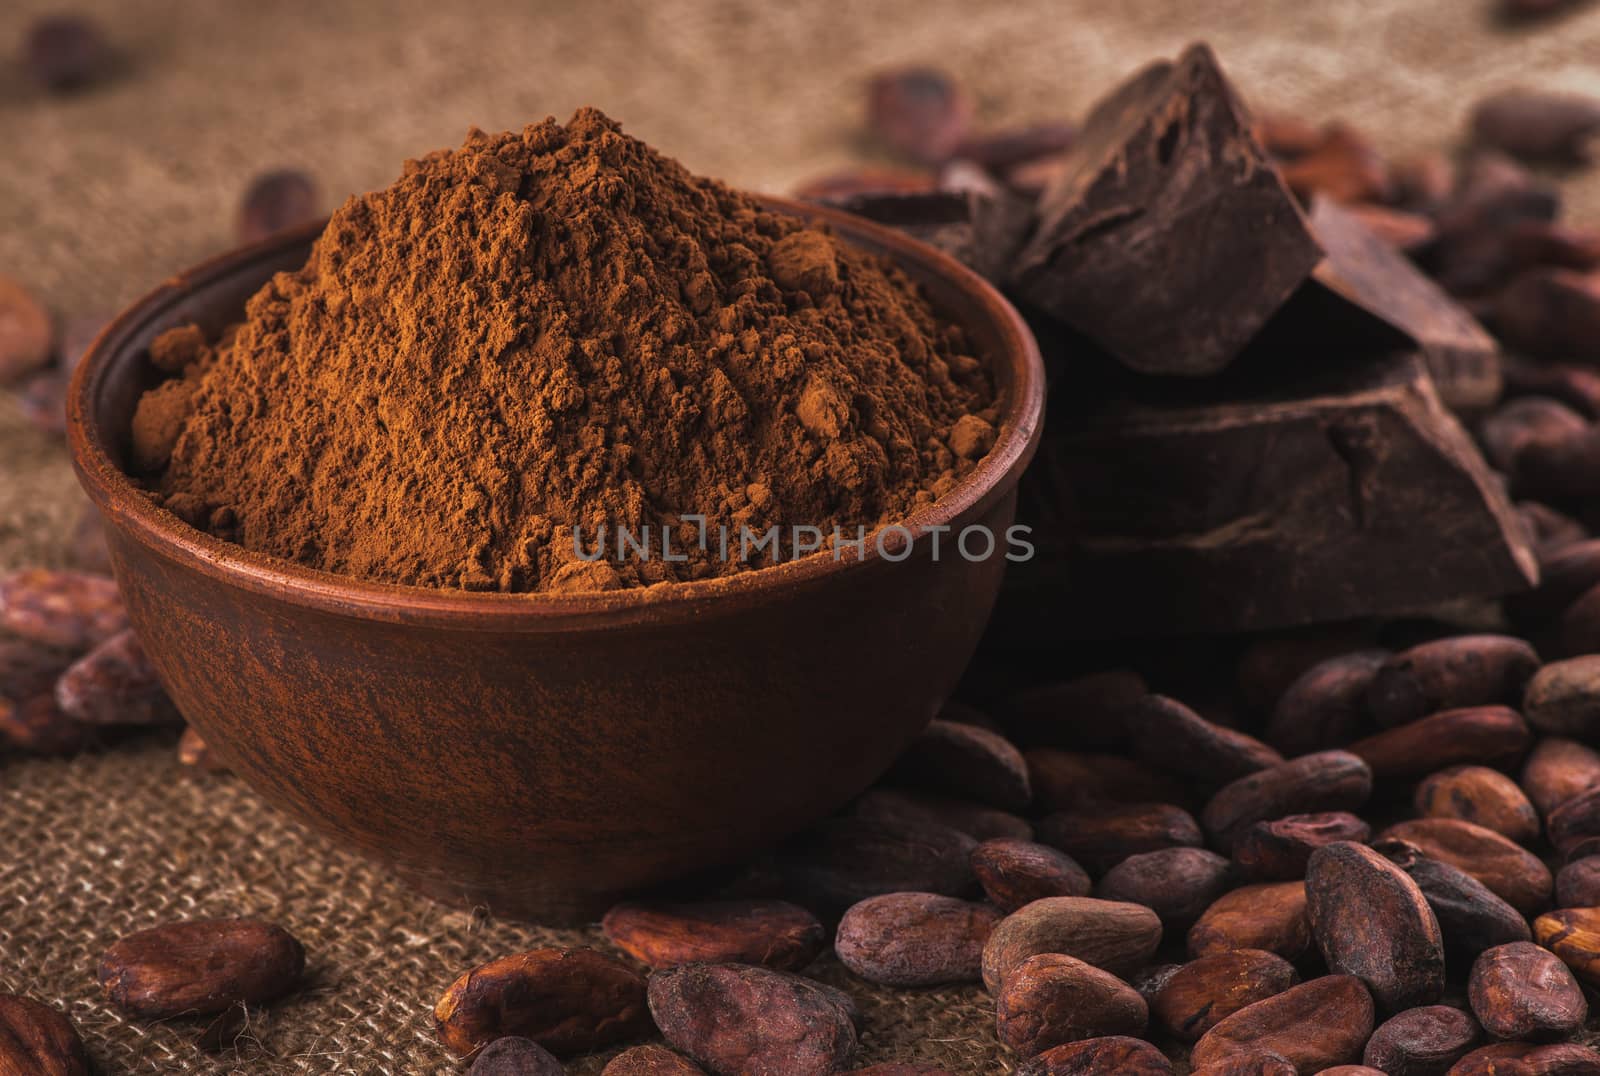 crude dark cocoa powder in a brown ceramic bowl, raw cocoa beans in the peel and raw chocolate on sacking close up, ingredients for preparing chocolate and sweets